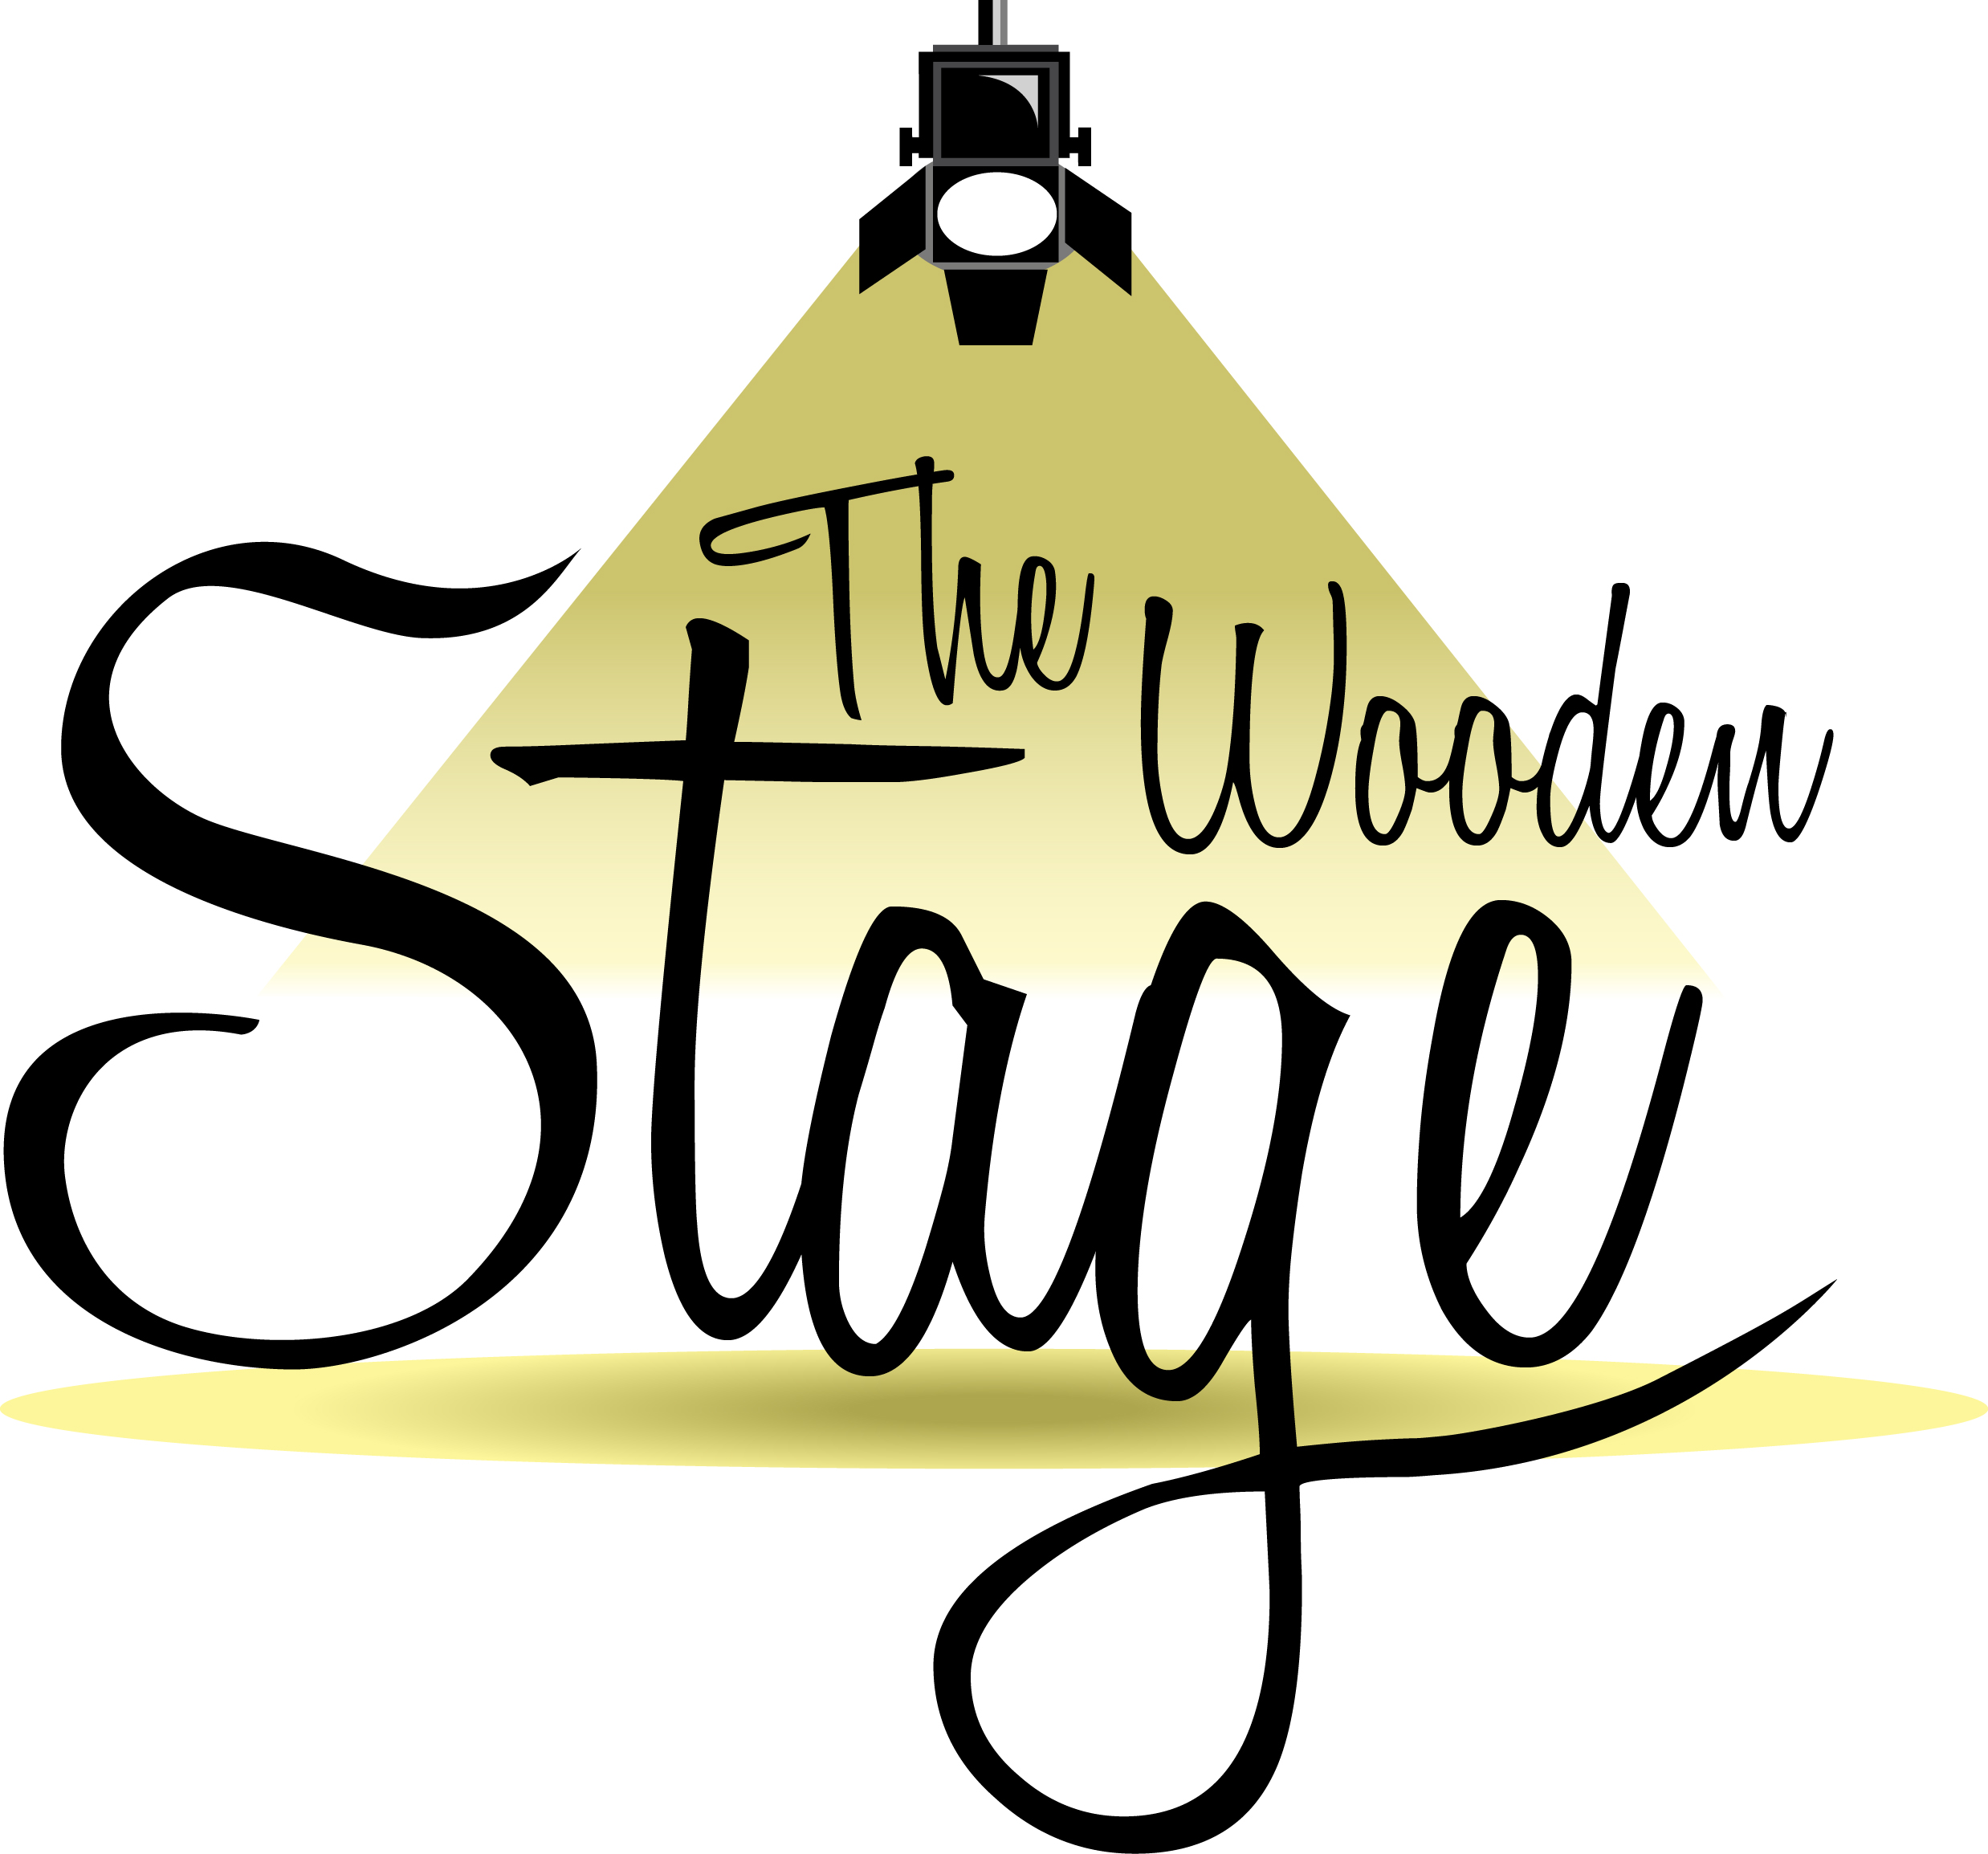 TheWoodenStage